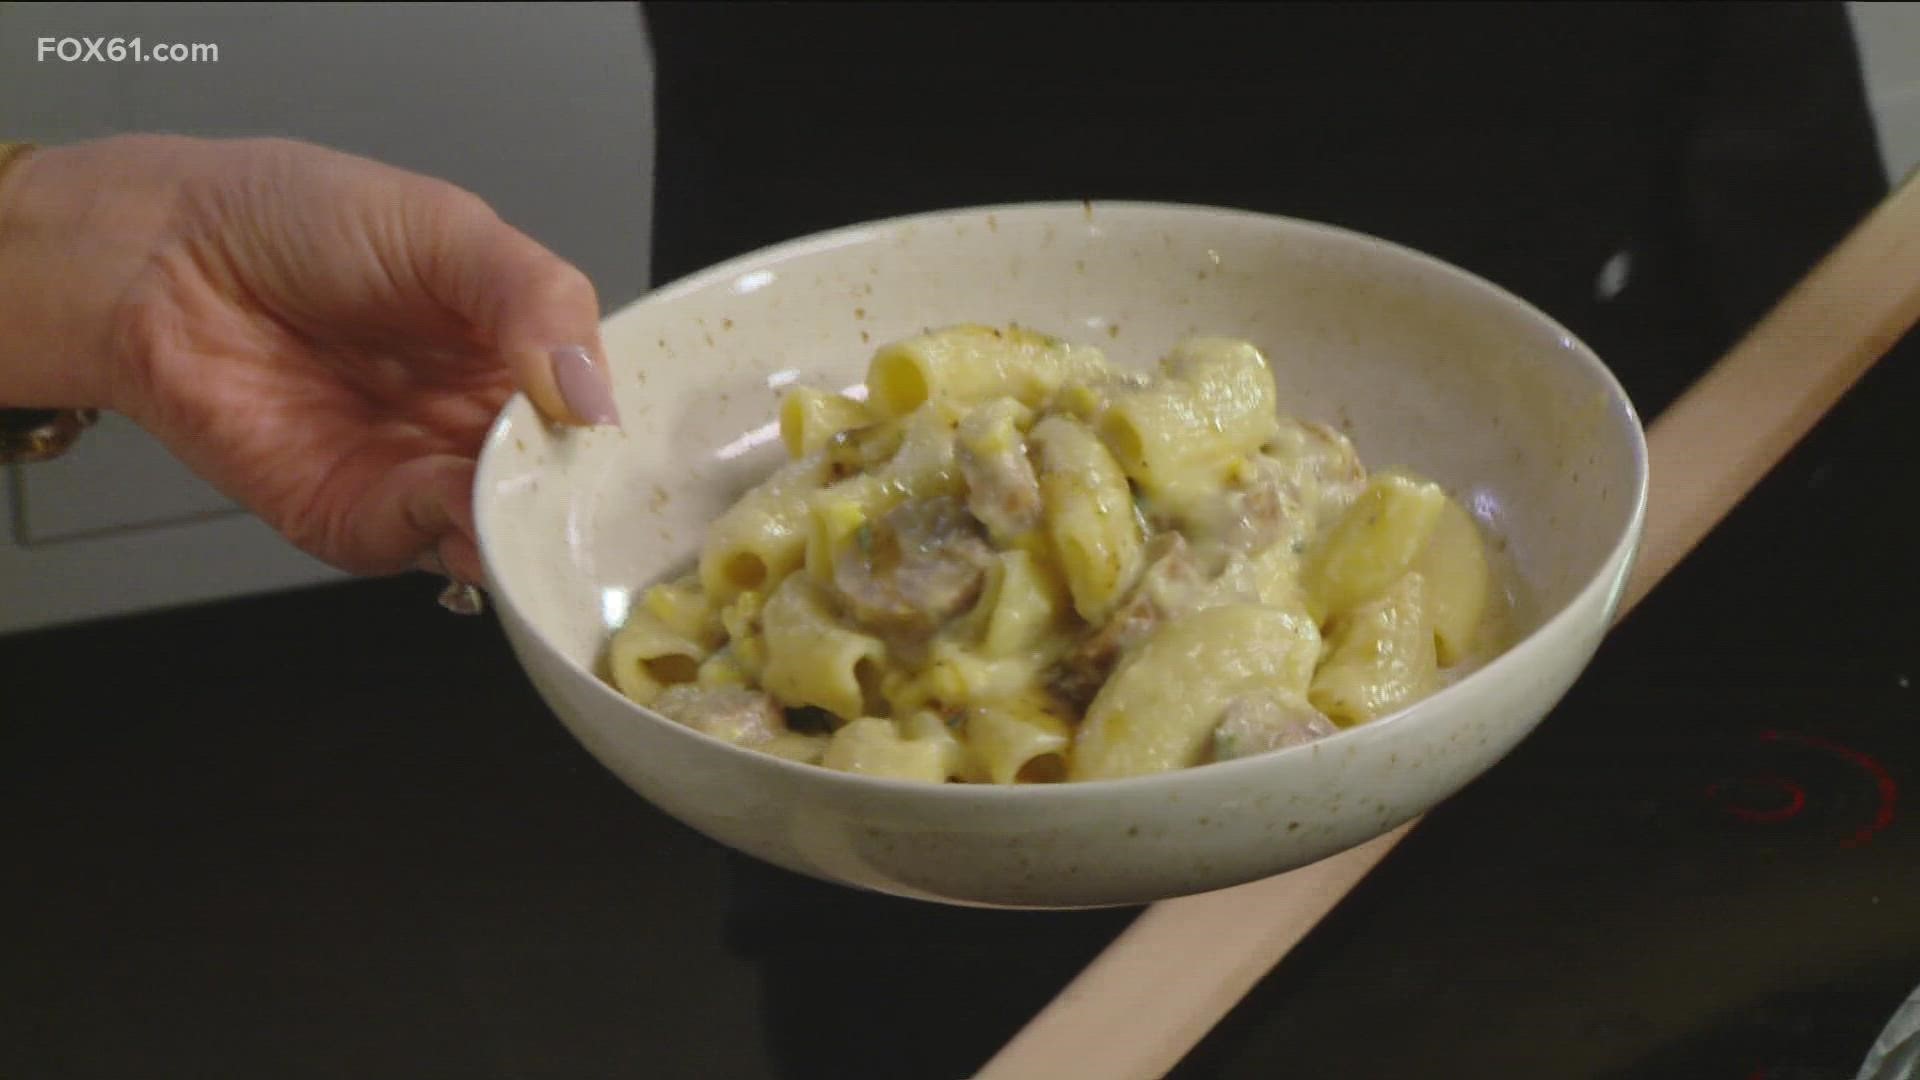 WECO customers don't get a bill until after they make and eat the dish. Here's how to make sweet corn and sausage miso rigatoni.